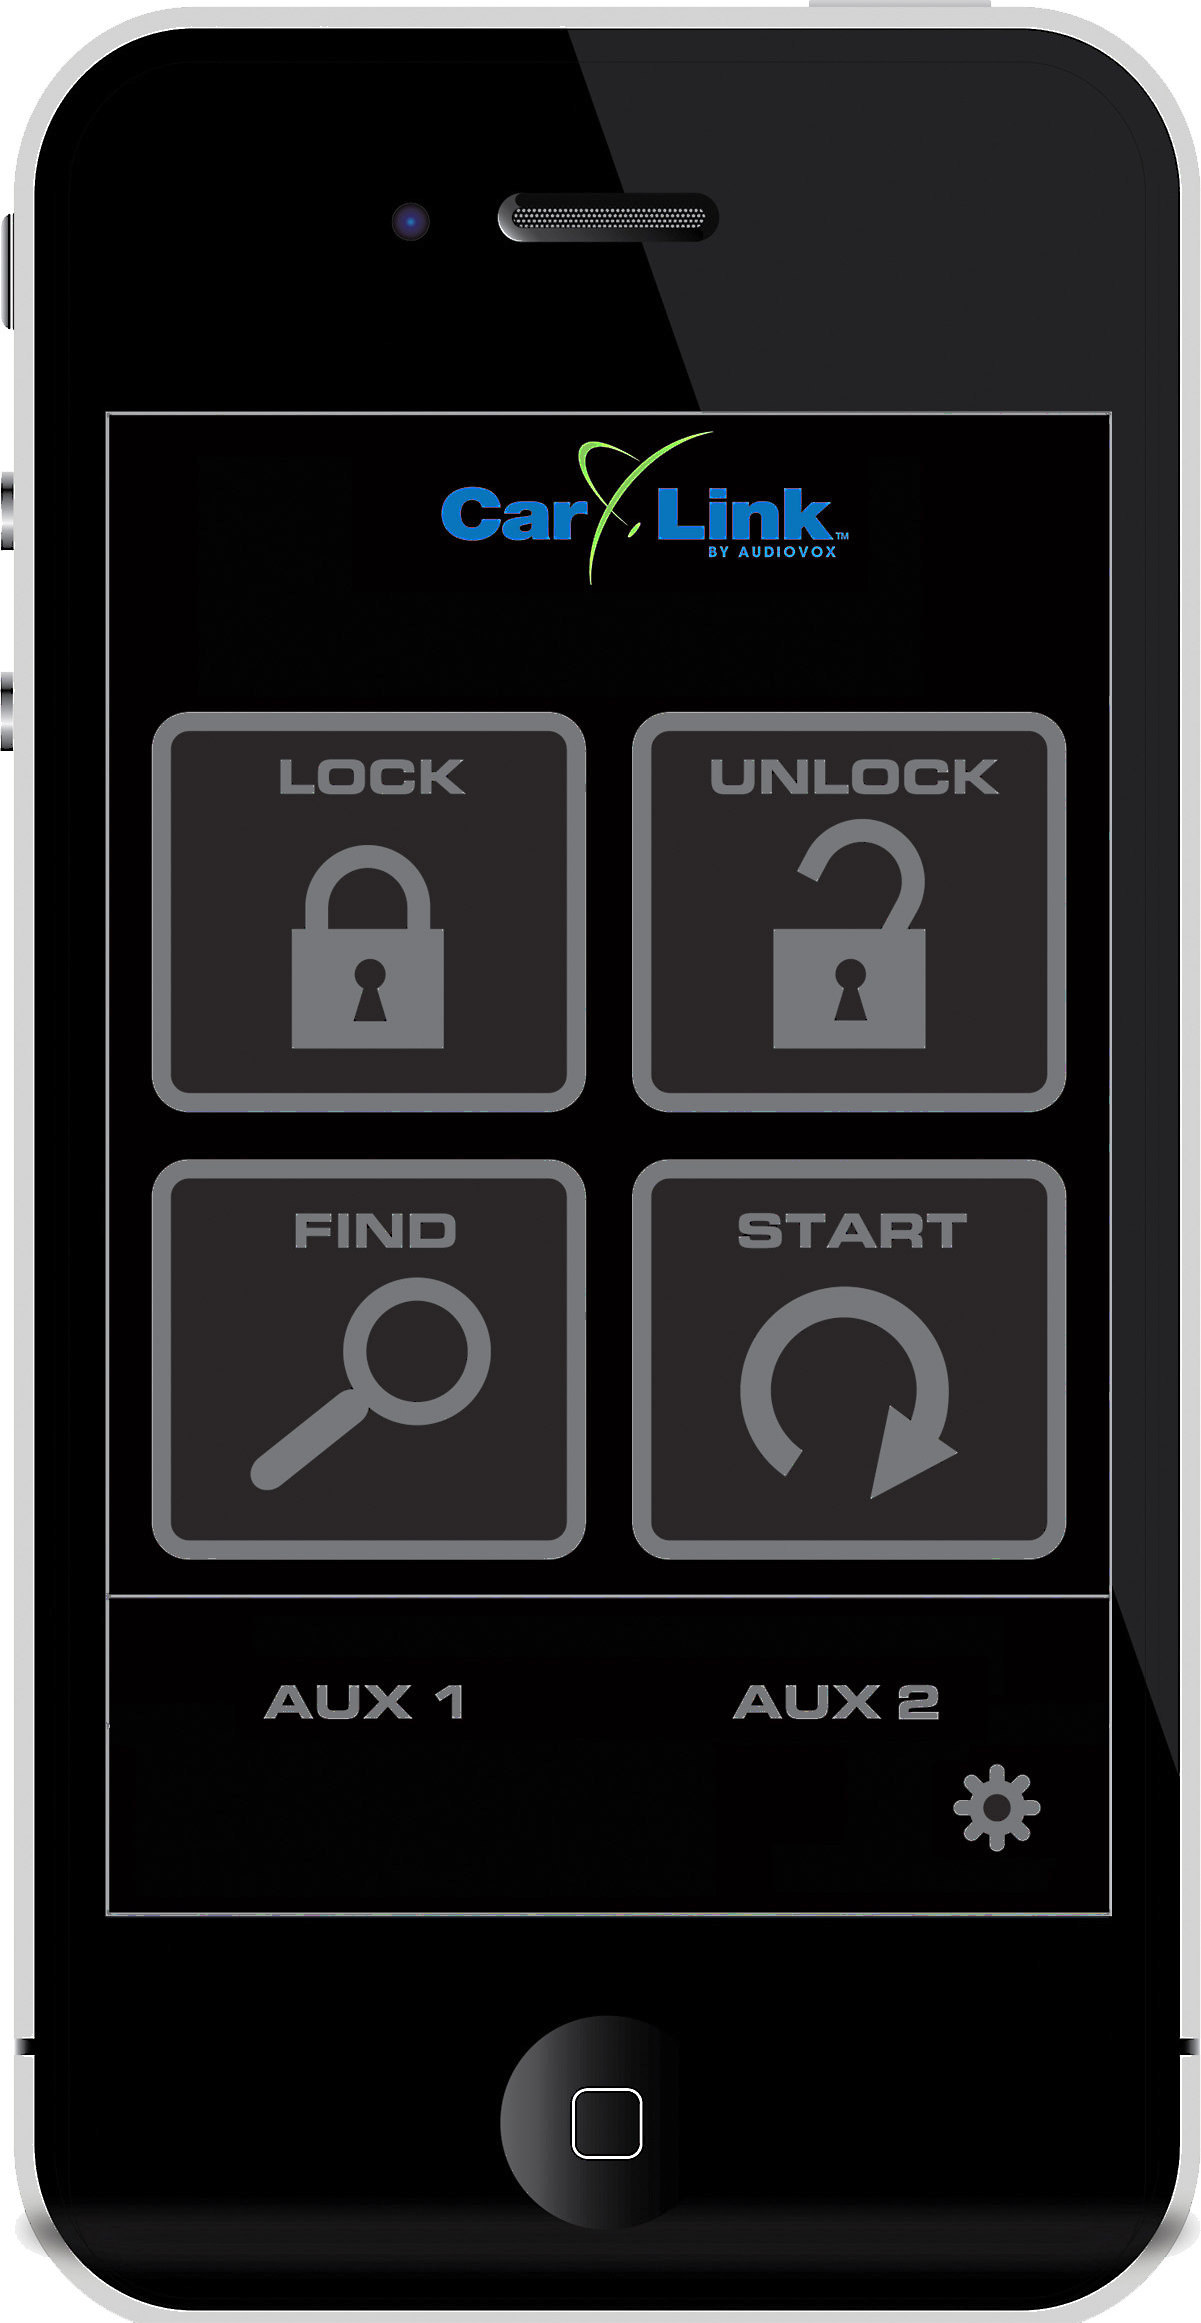 Audiovox Car Link Remote start interface — use your smartphone to start